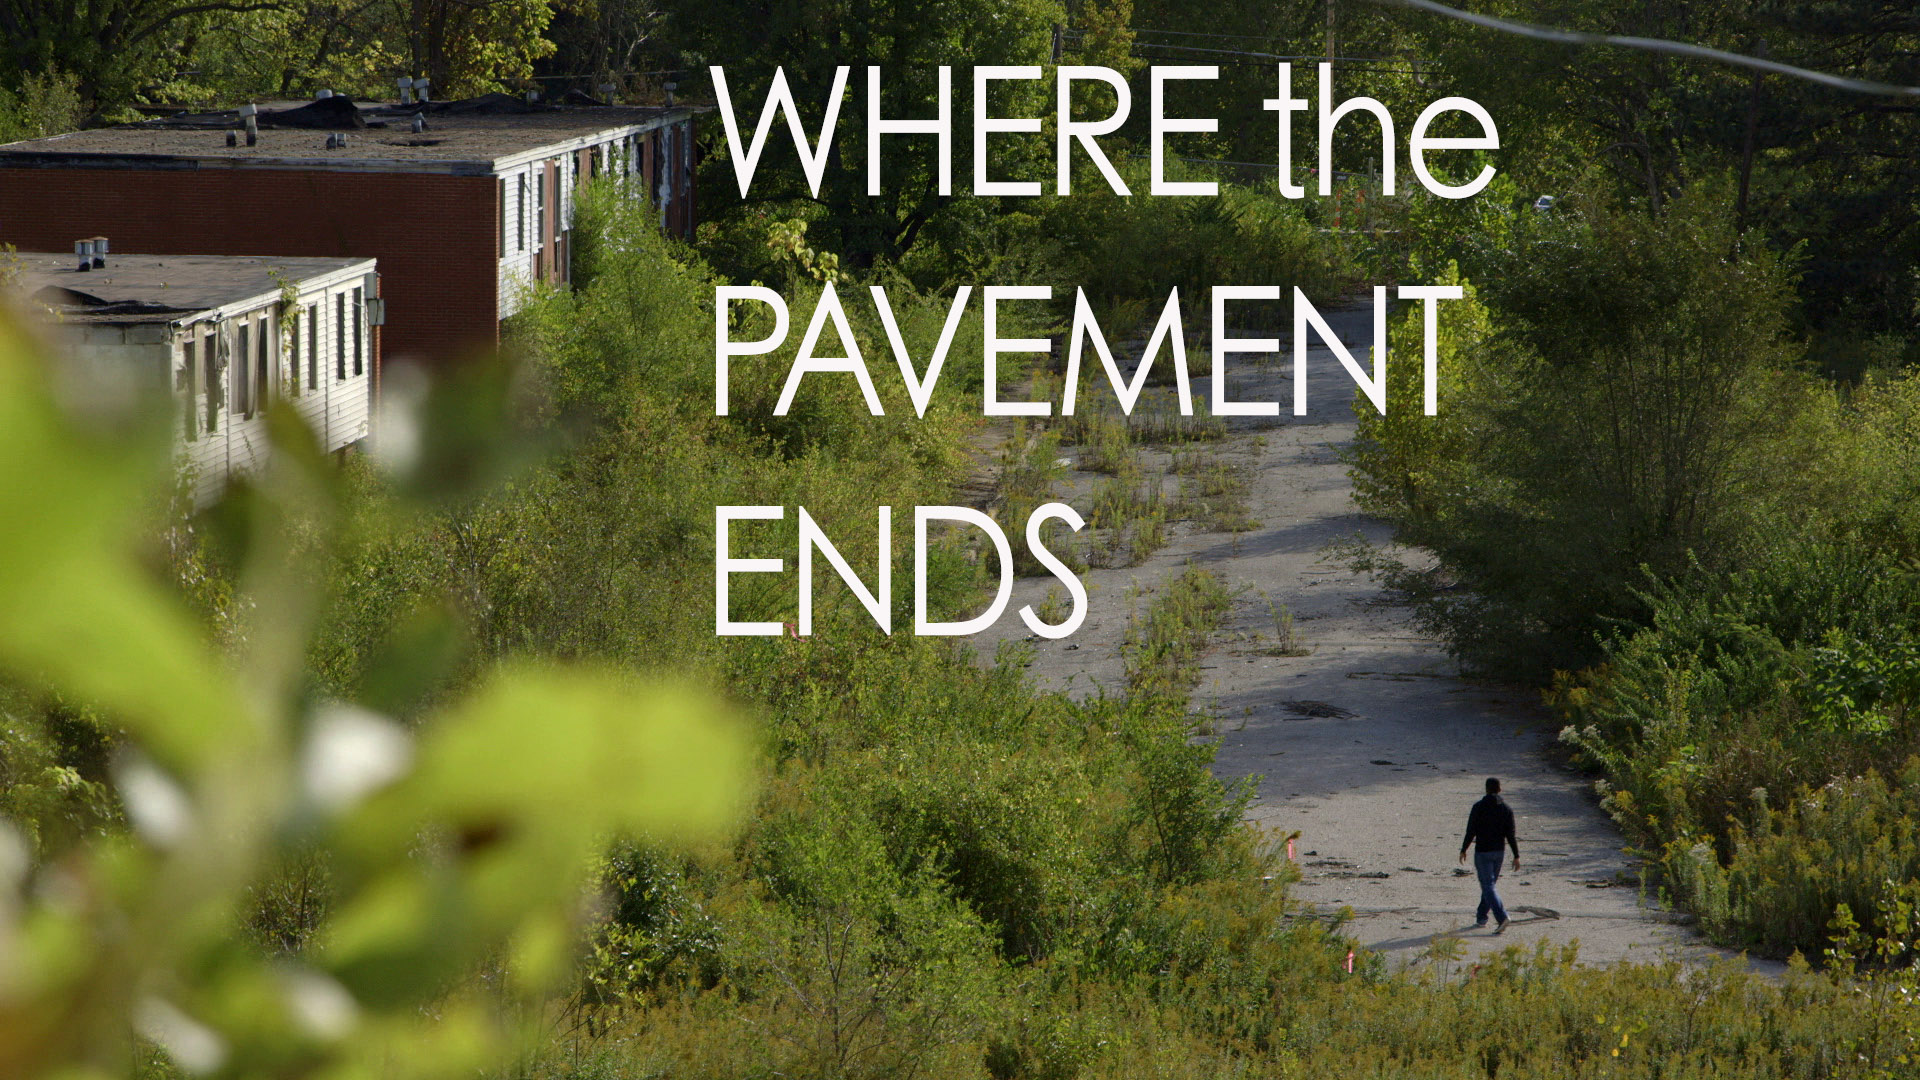 WHERE the PAVEMENT ENDS (2019) Transports viewers to the Missouri towns of Kinloch and Ferguson, examining the  shared histories and deep racial divides affecting both.